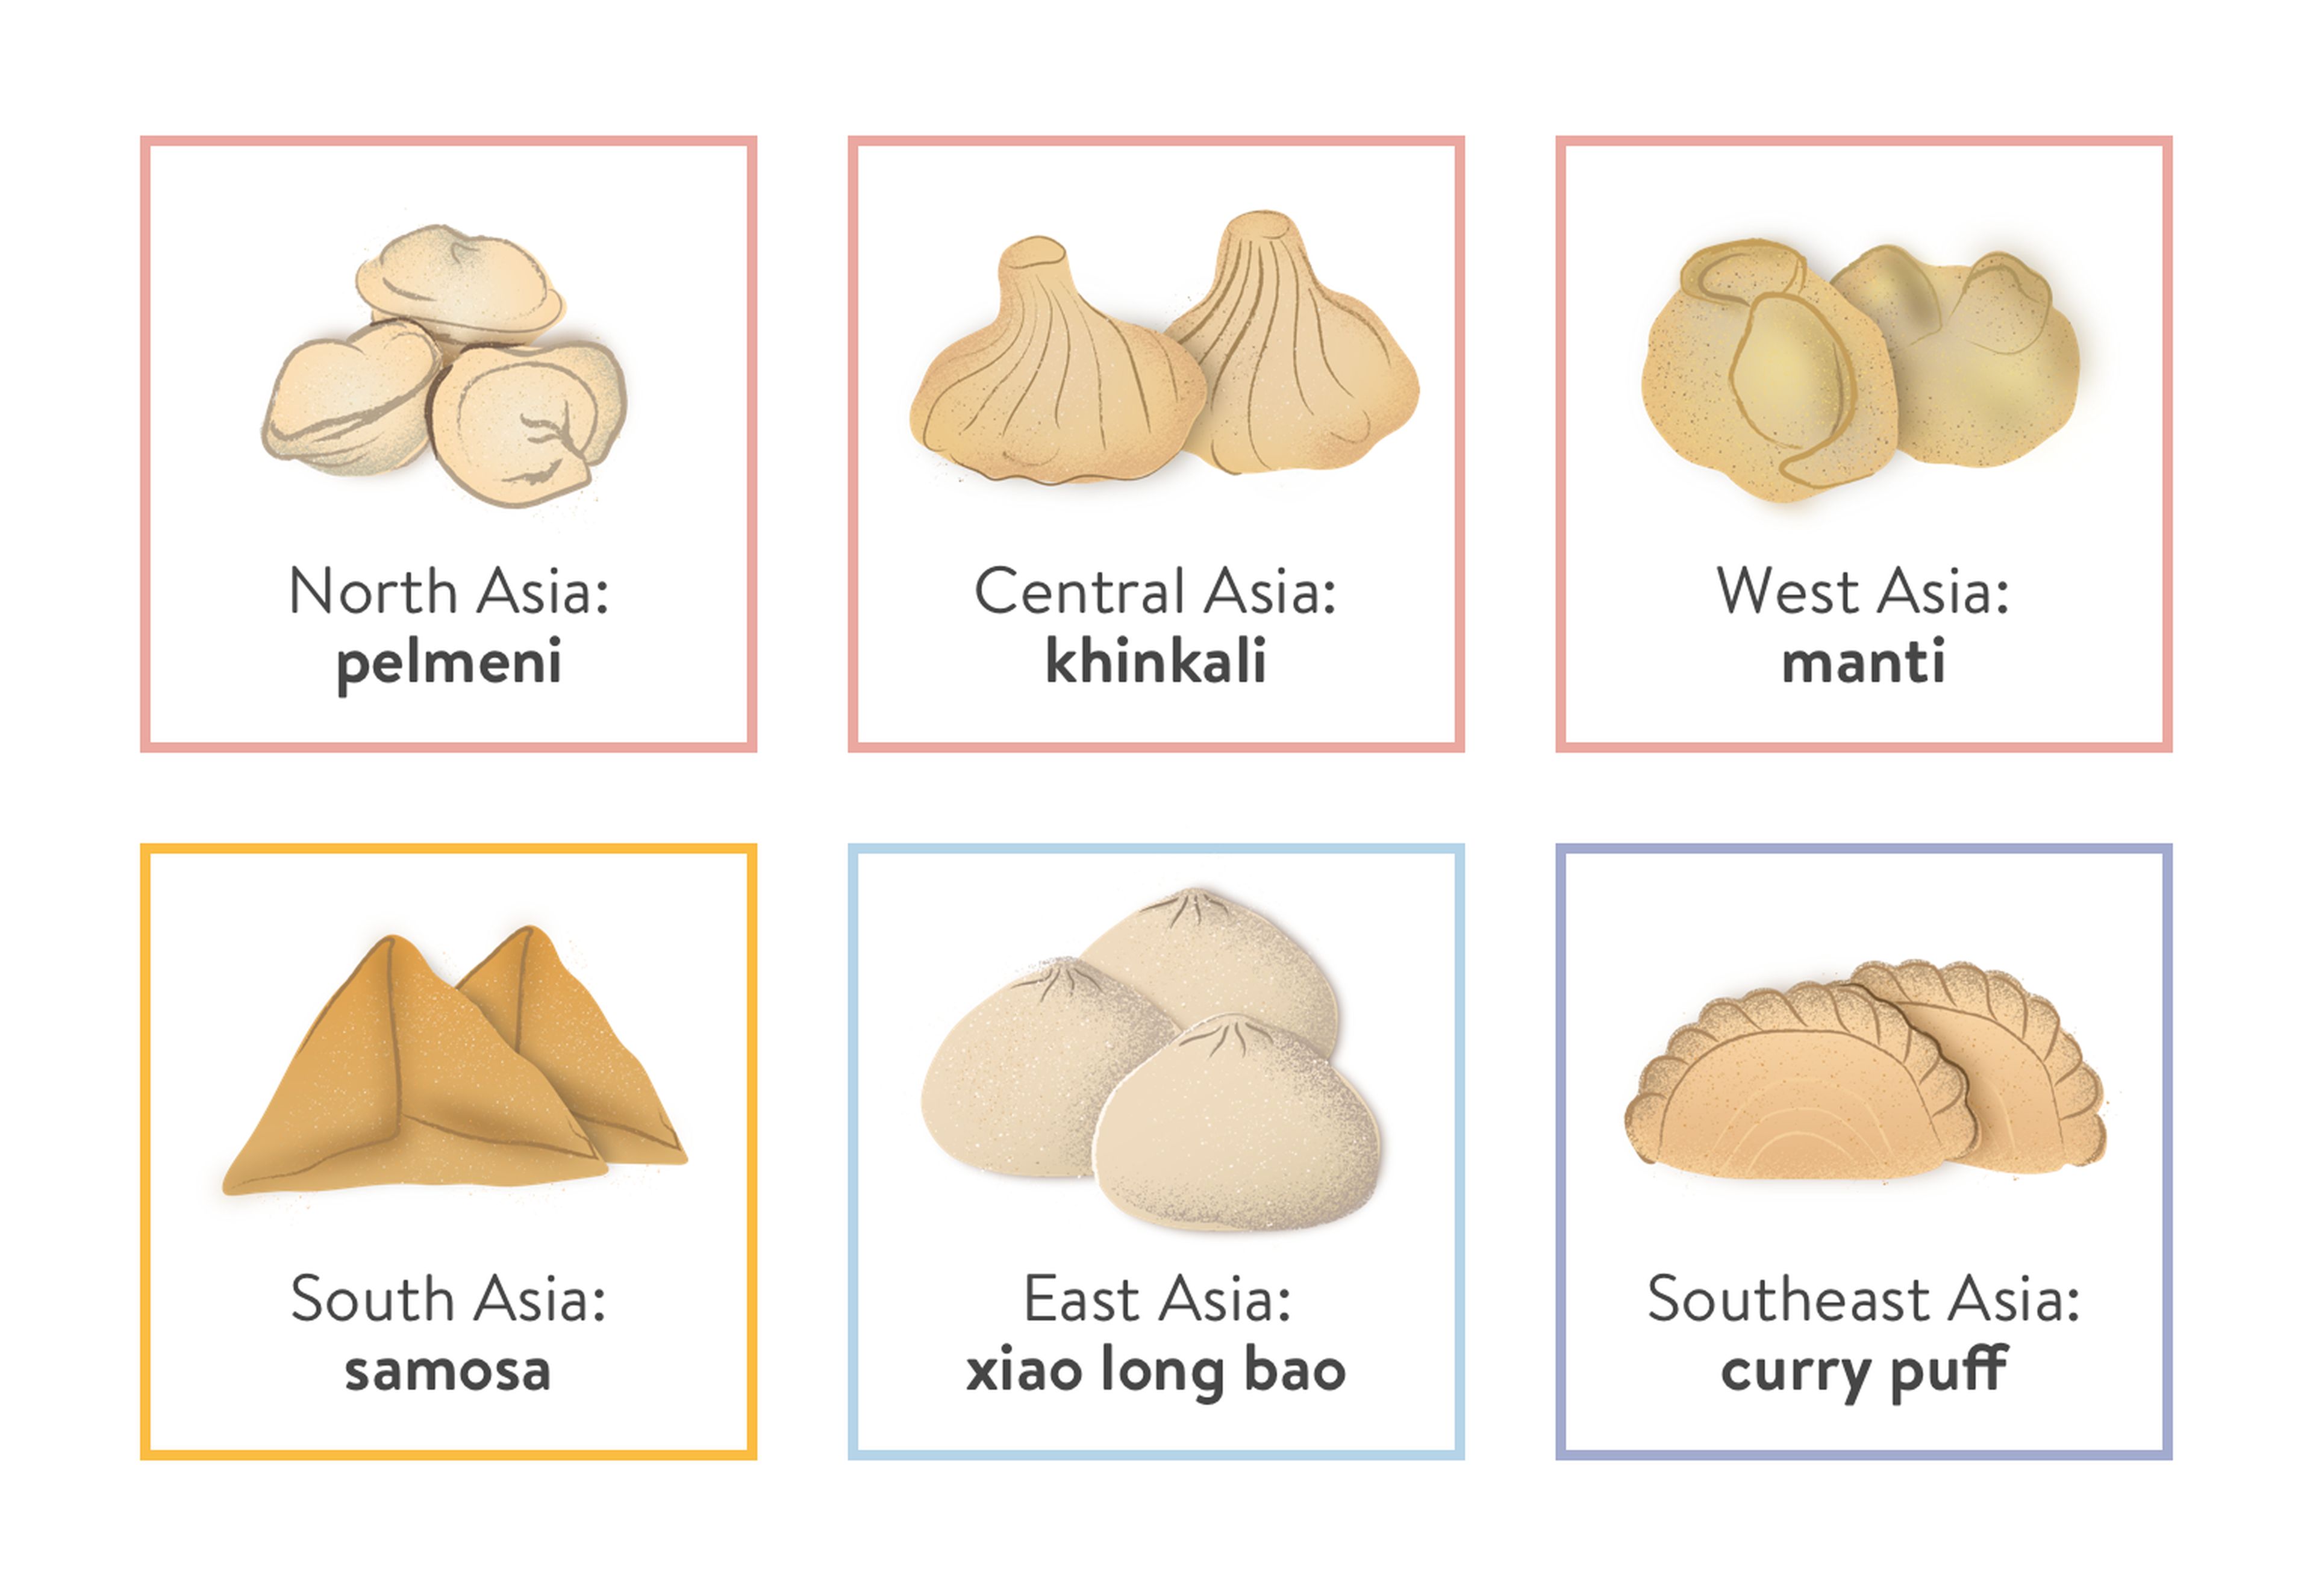 An Edible Map of Asian Cuisines, Stories